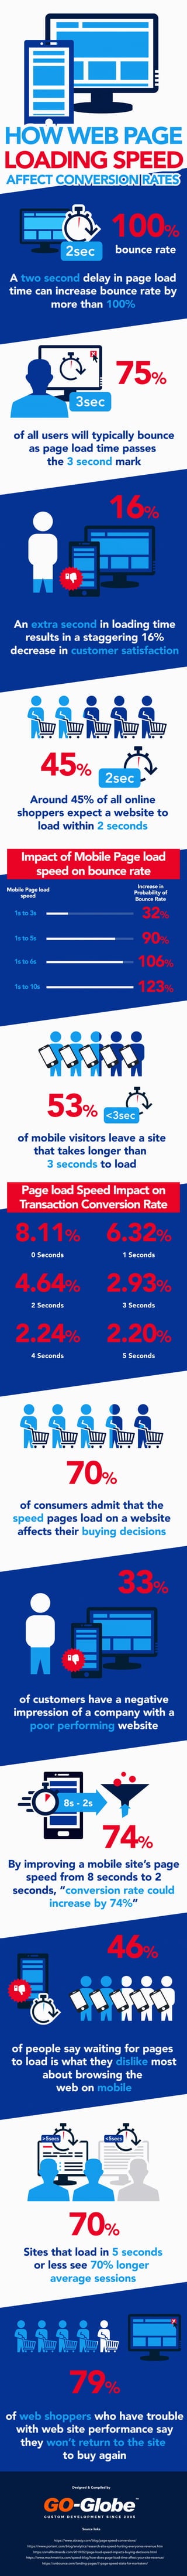 How Web Page Loading Speed affect conversion rates [Infographic]